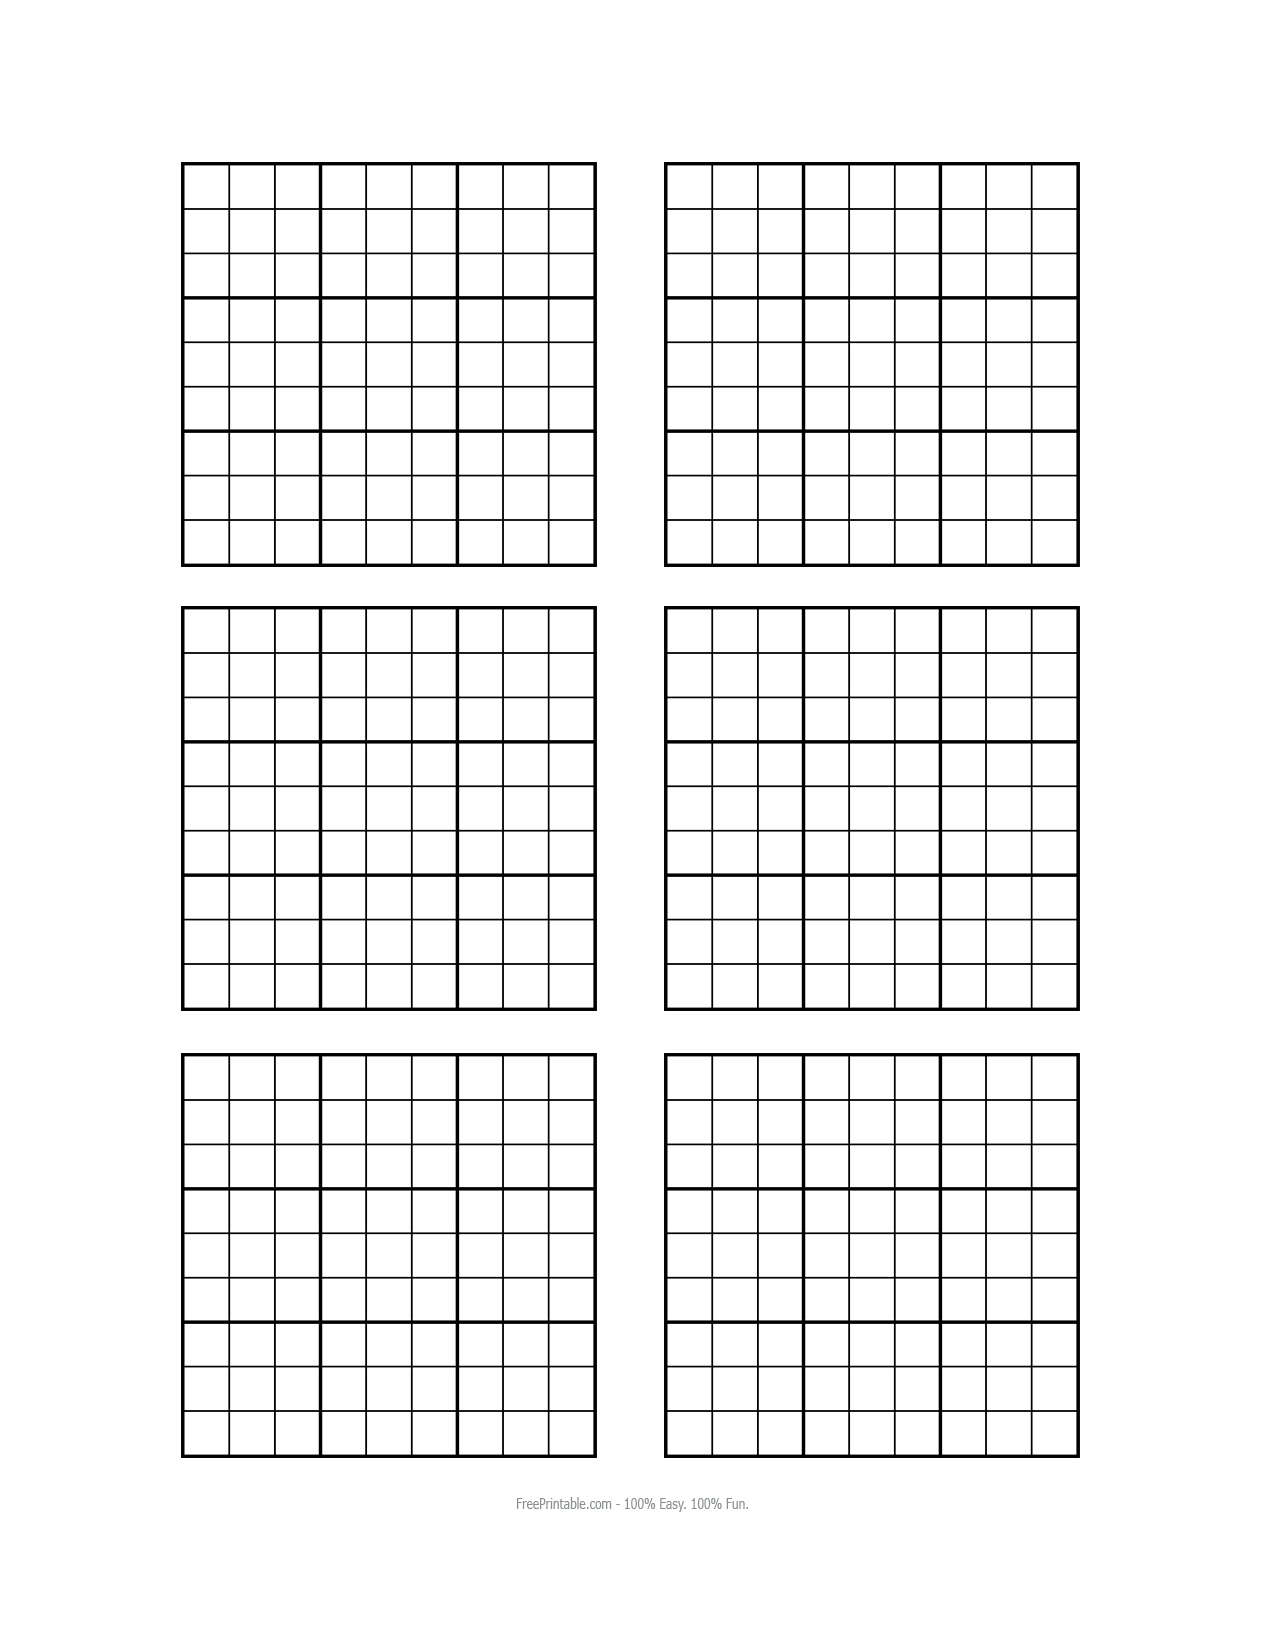 Search Results for Sudoku Blank Page To Print Calendar 2015